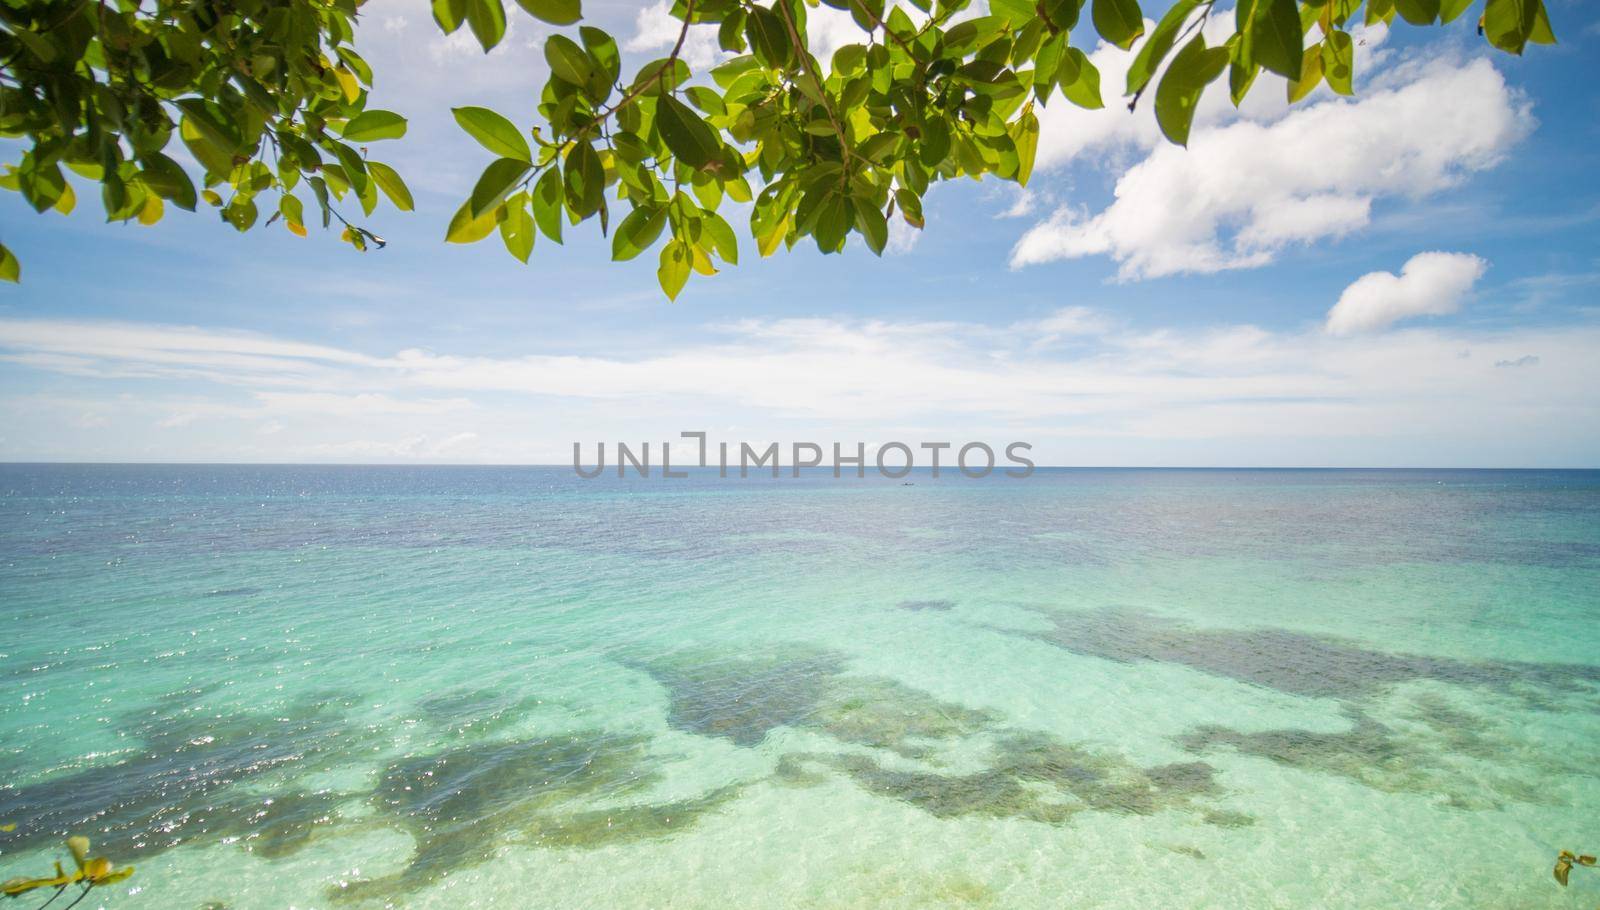 The tropical coast of the island of Bohol with corals and overhanging branches of a tree. Philippines